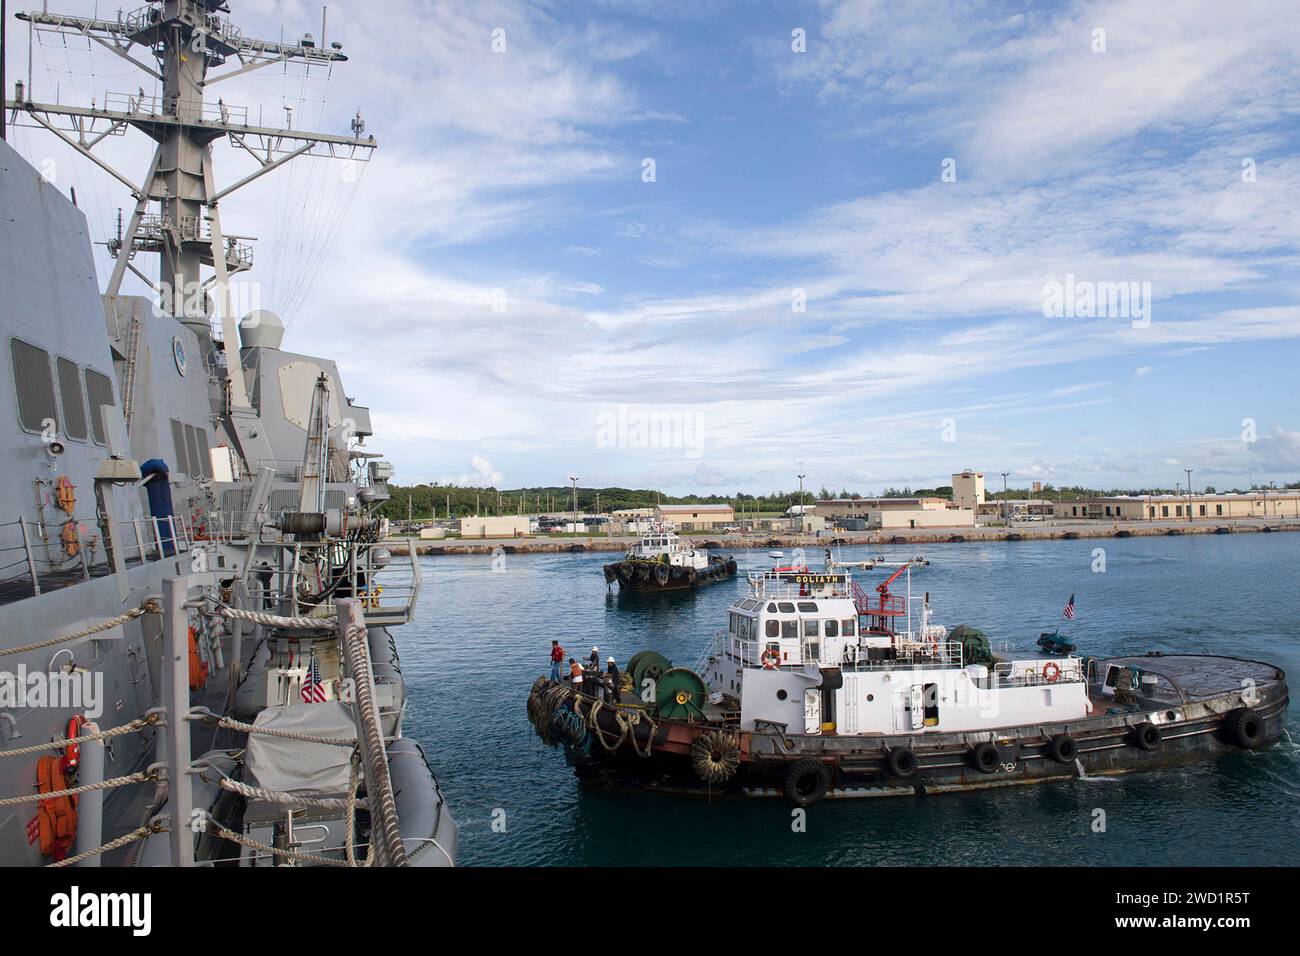 Harbor tugboats approach the Arleigh Burke-class guided-missile destroyer USS Sterett. Stock Photo